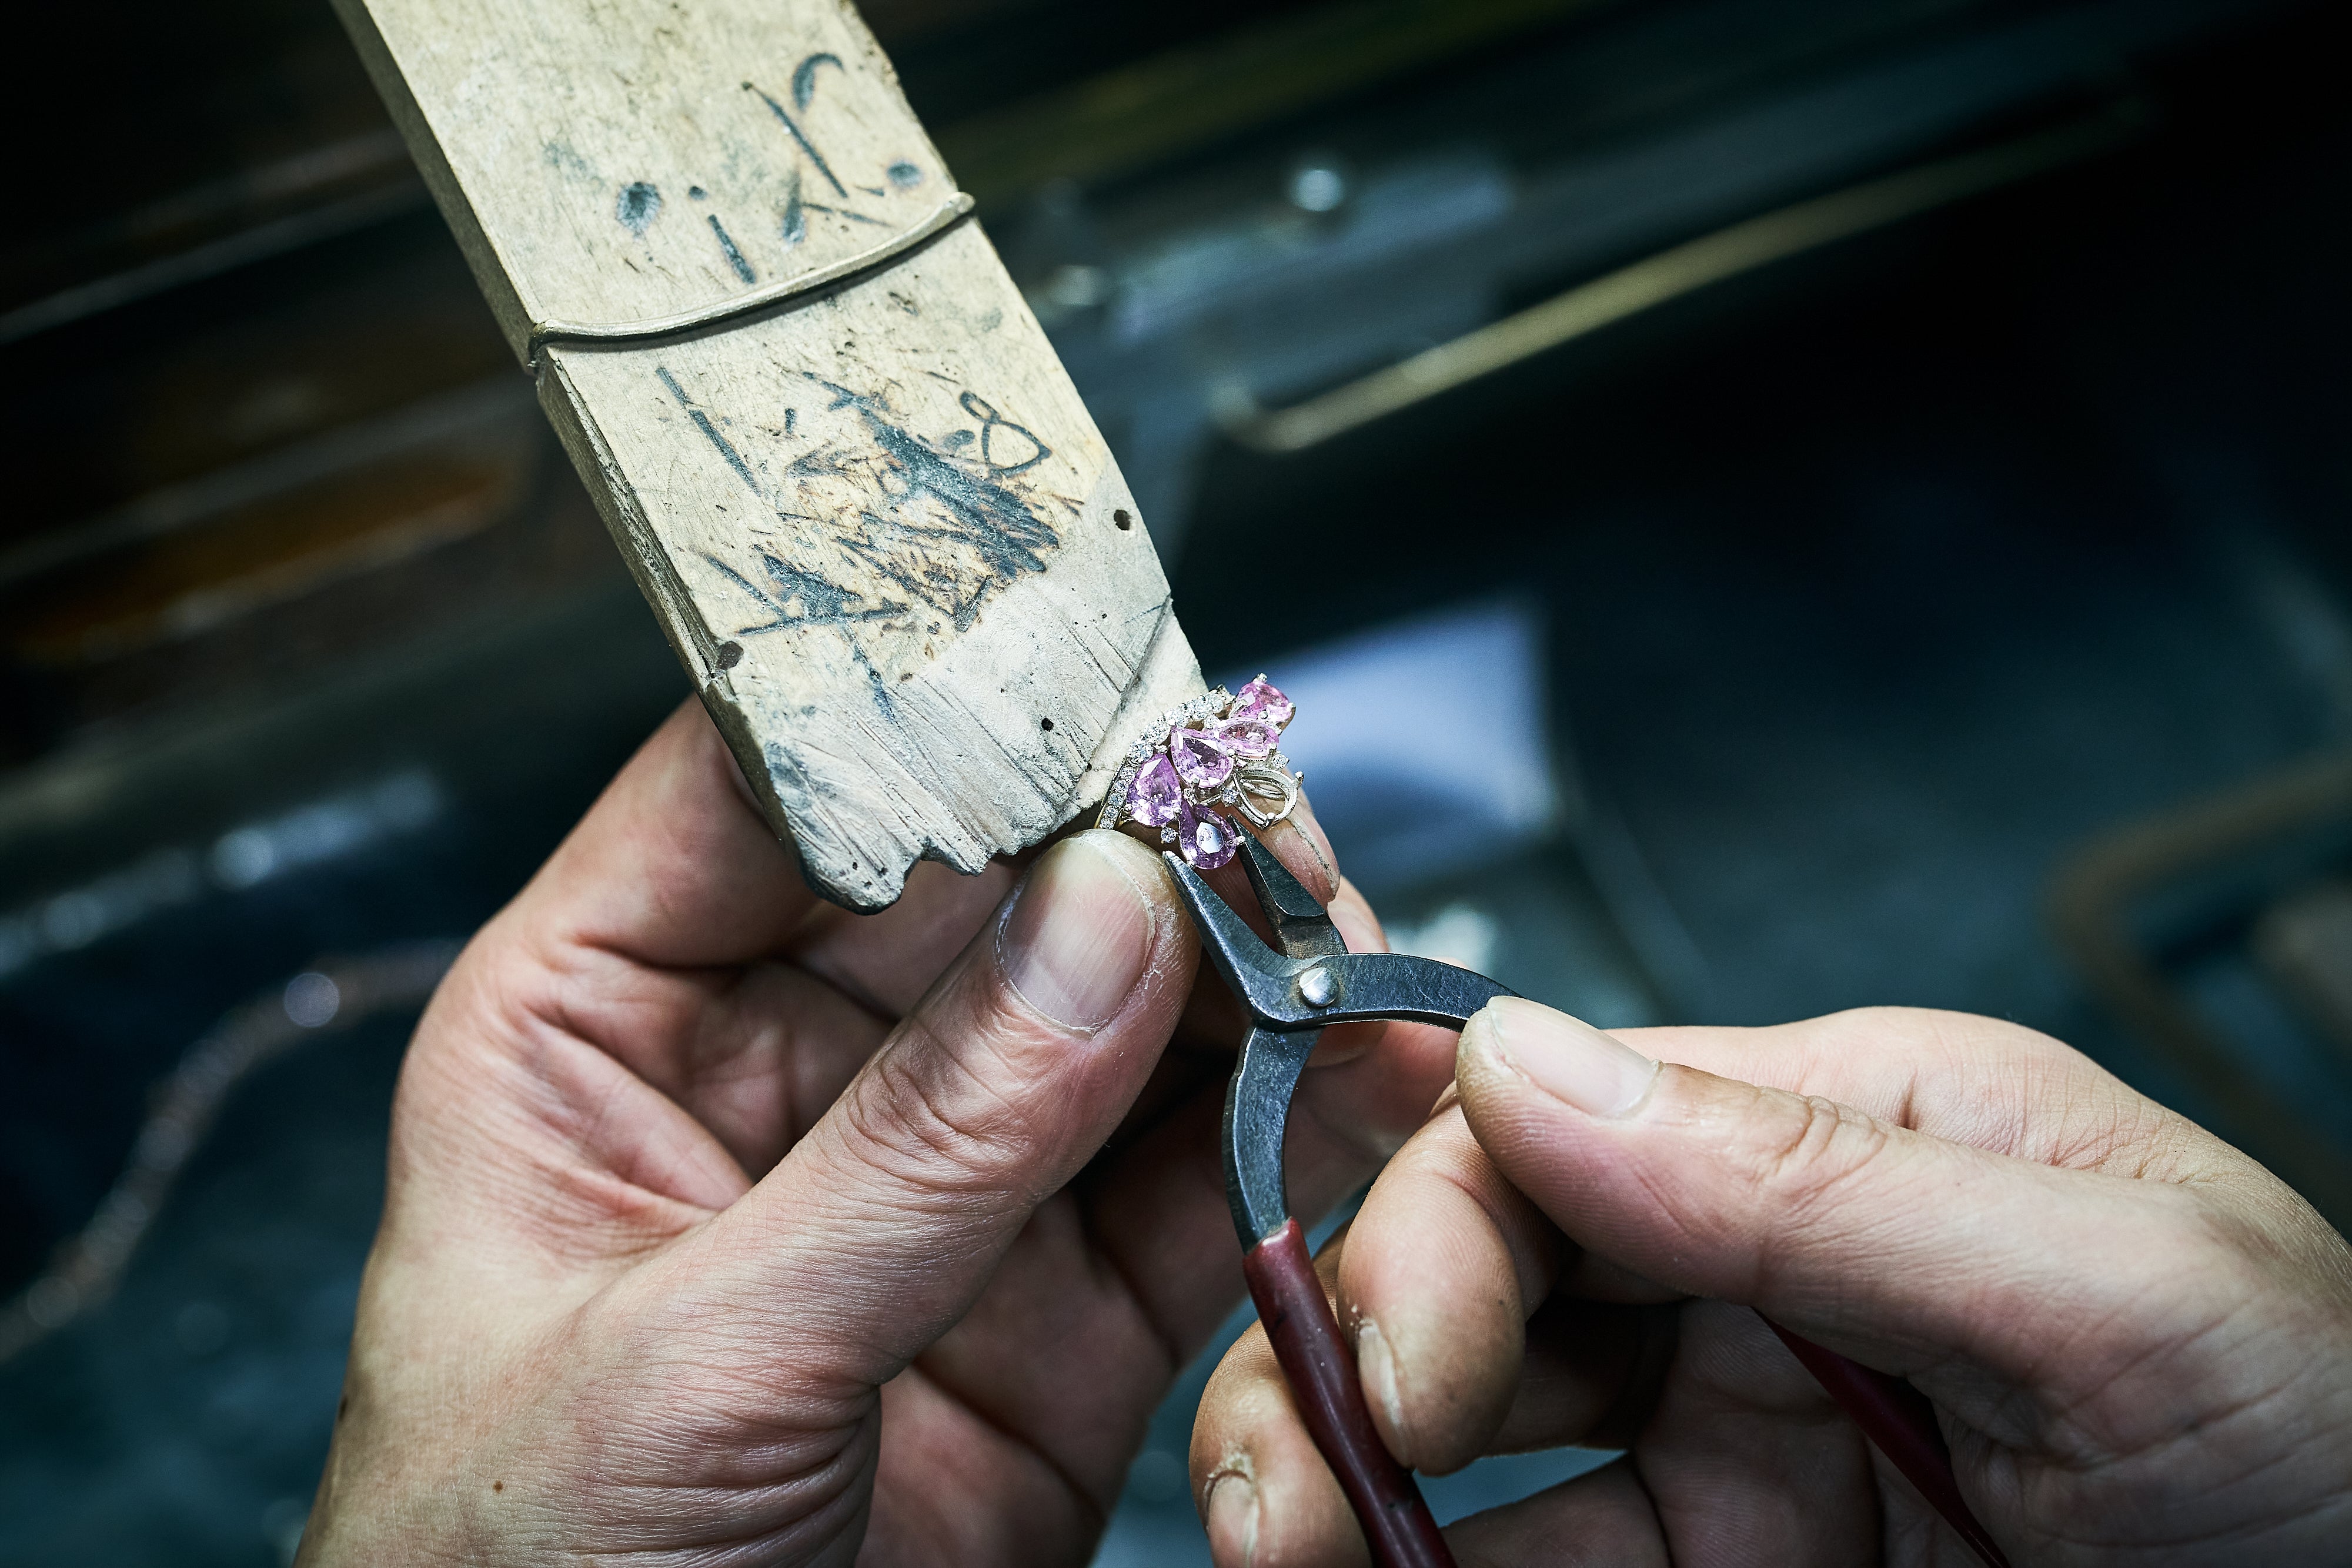 Pliers are used to adjust pink gemstone within ring frame